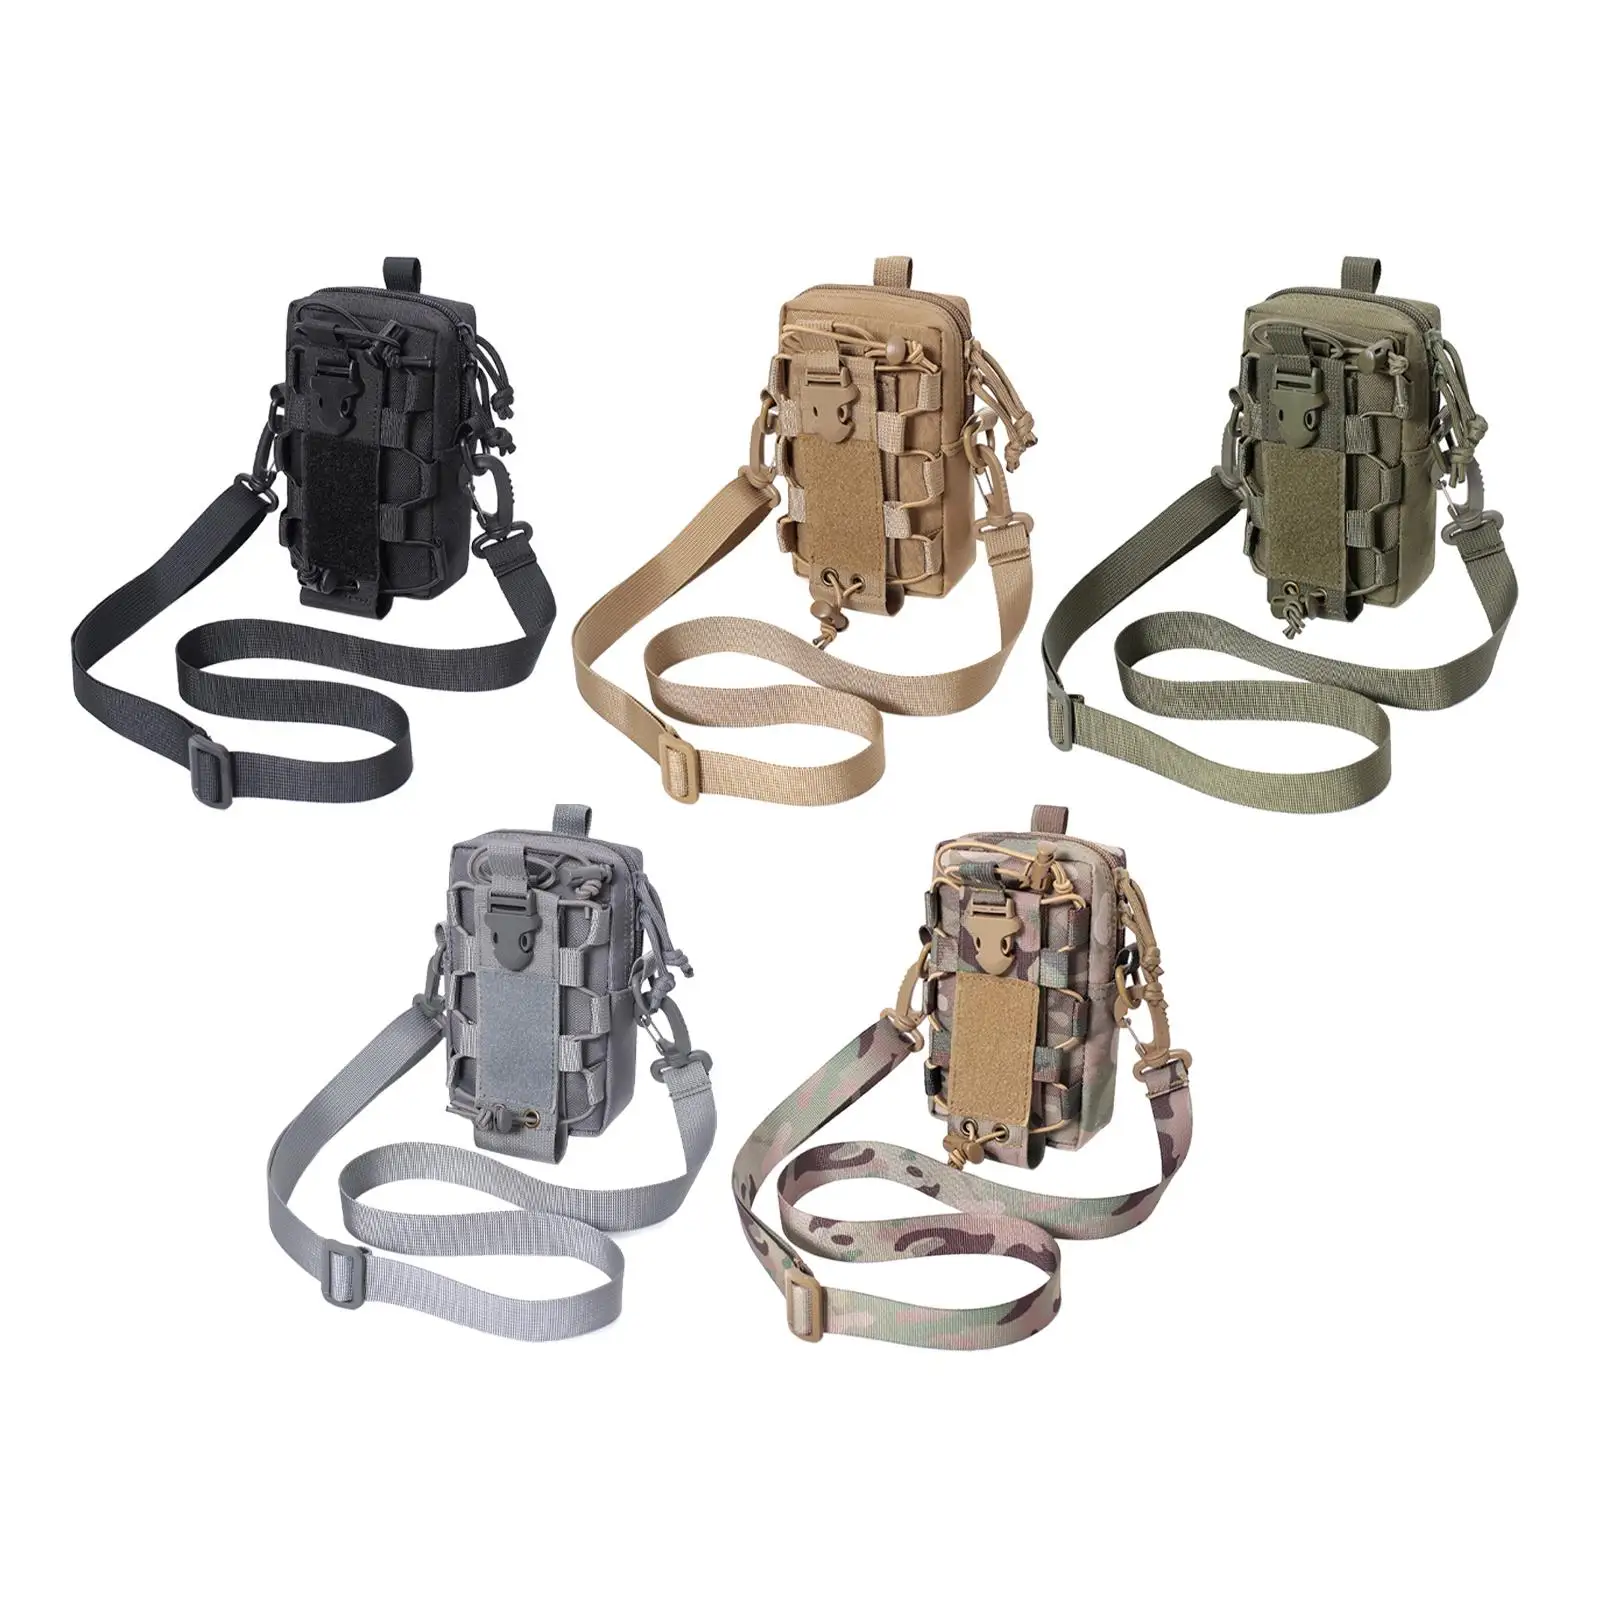 Tactical Bag with Shoulder Strap Waist Bag Pouch Organizer for Travel Hiking